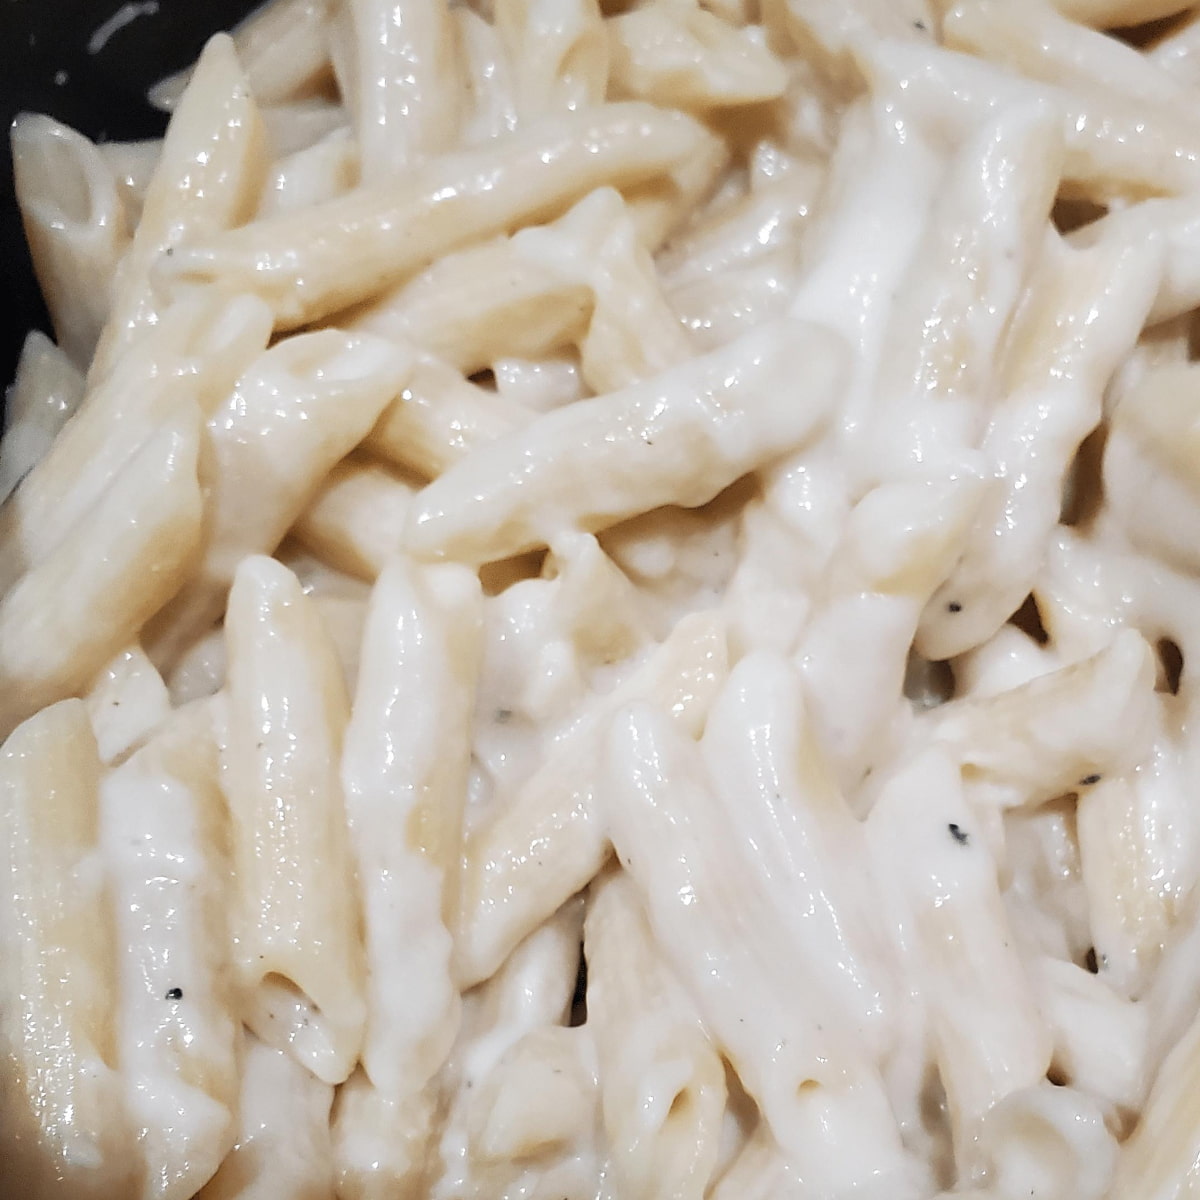 easy creamy mac and cheese recipe from cleveland cooking. pasta covered in a creamy cheese sauce.